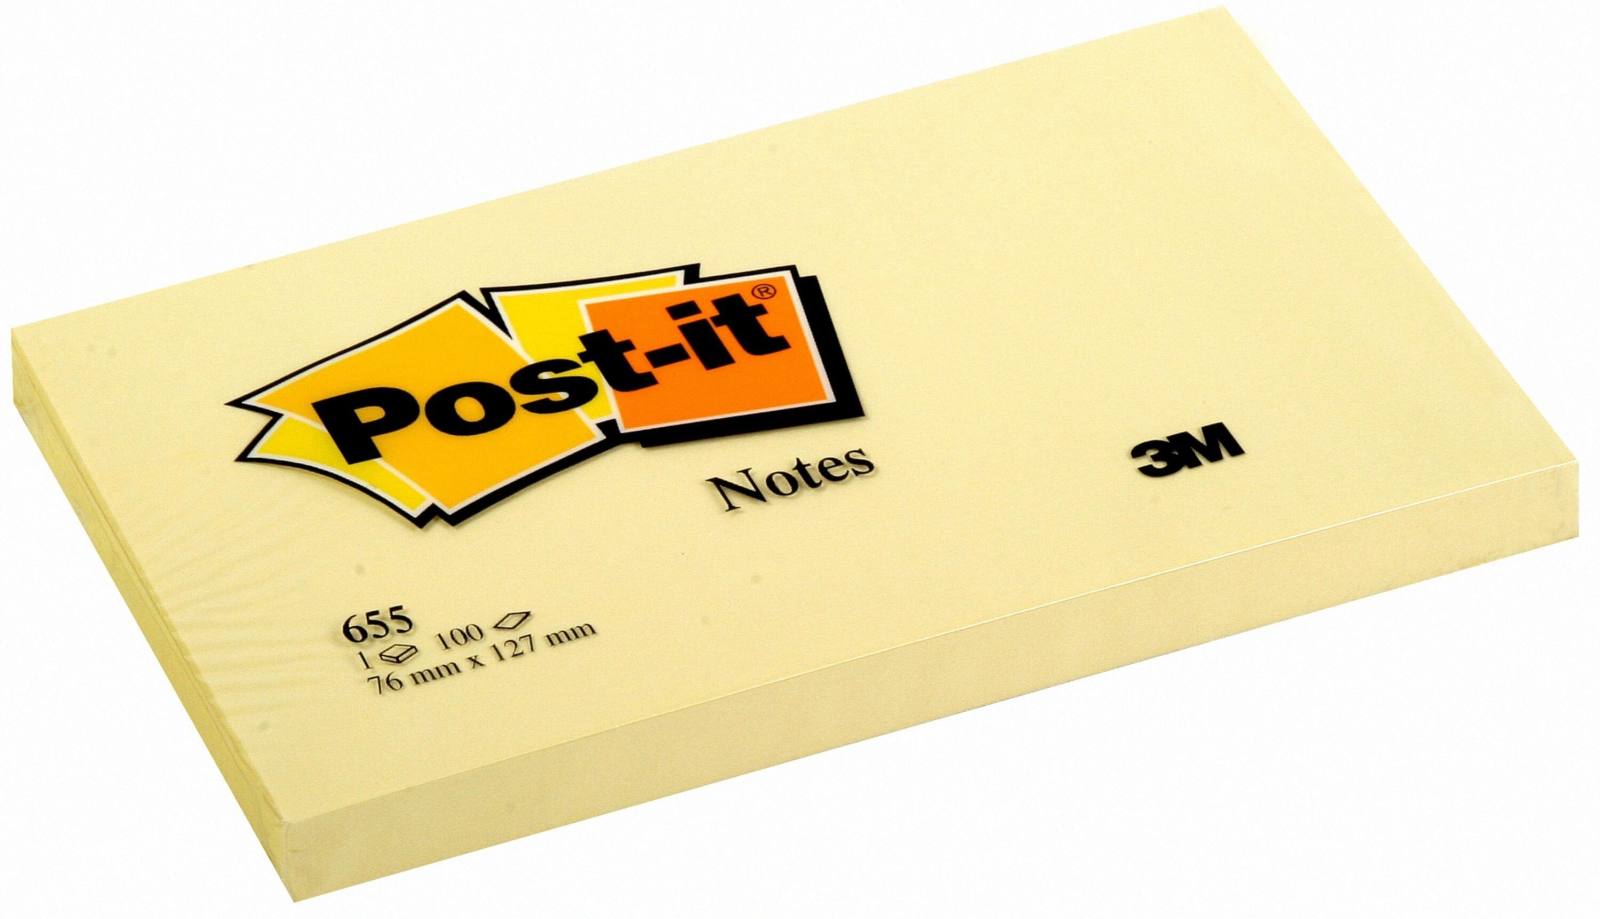 3M Post-it Notes 655, 127 mm x 76 mm, yellow, 1pack = 12x 1 pad of 100 sheets